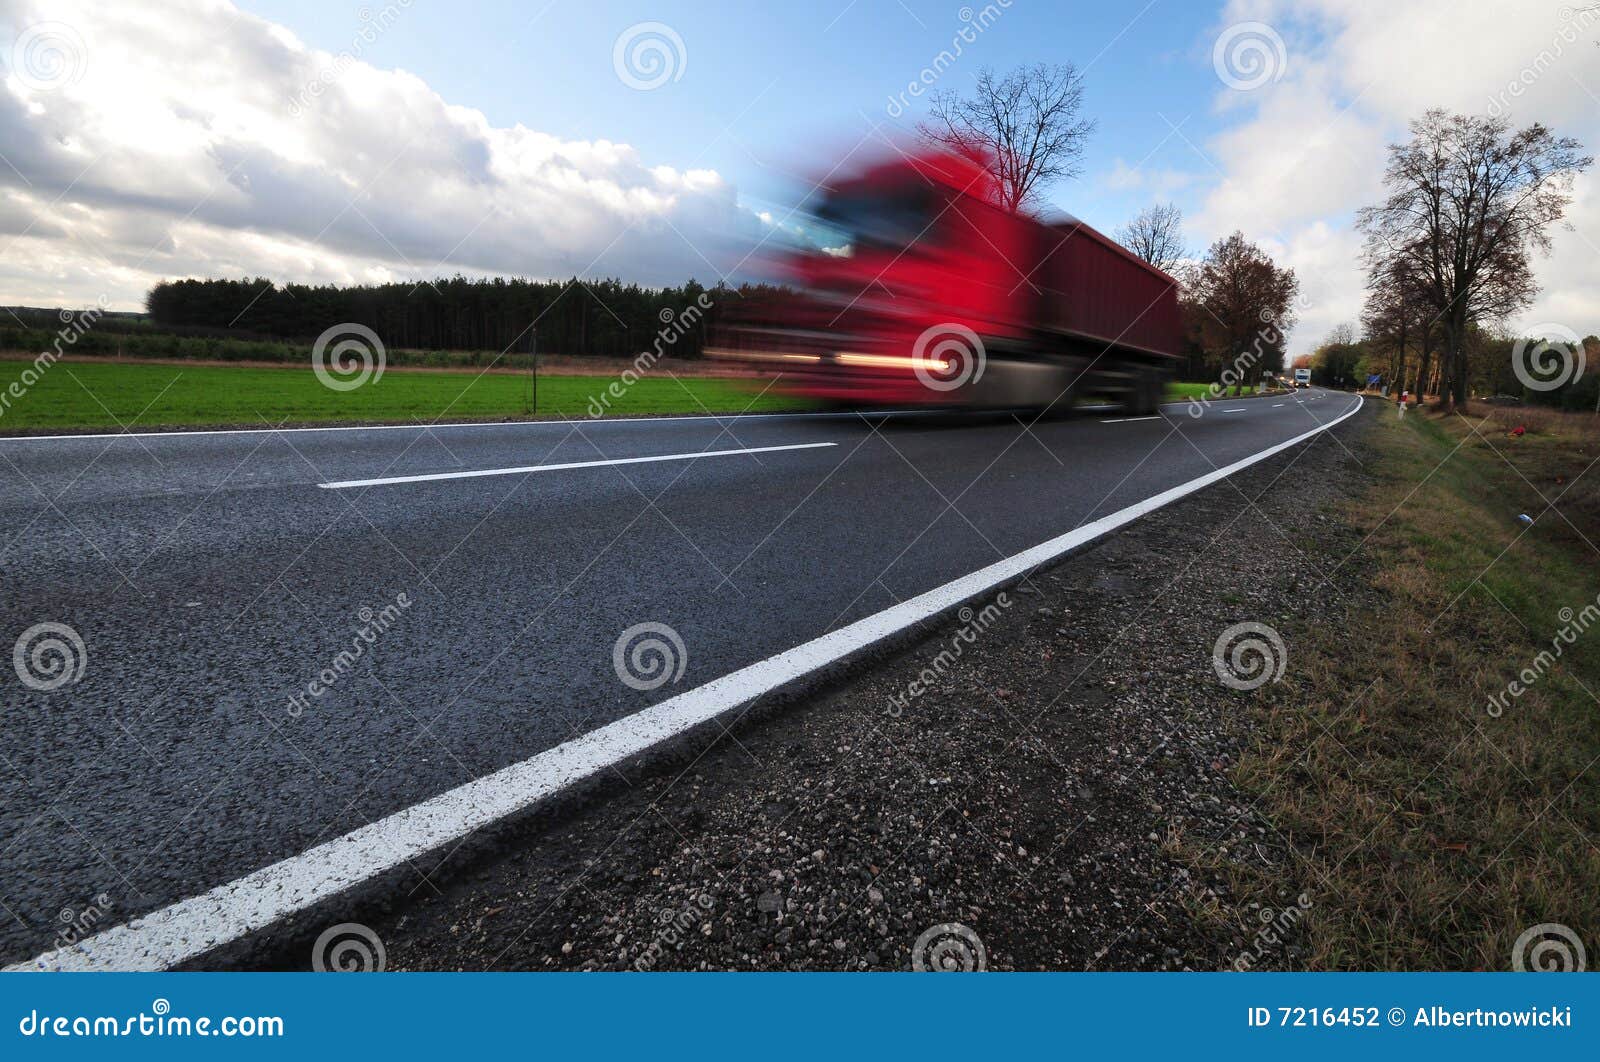 red truck in a motion on tarmac road